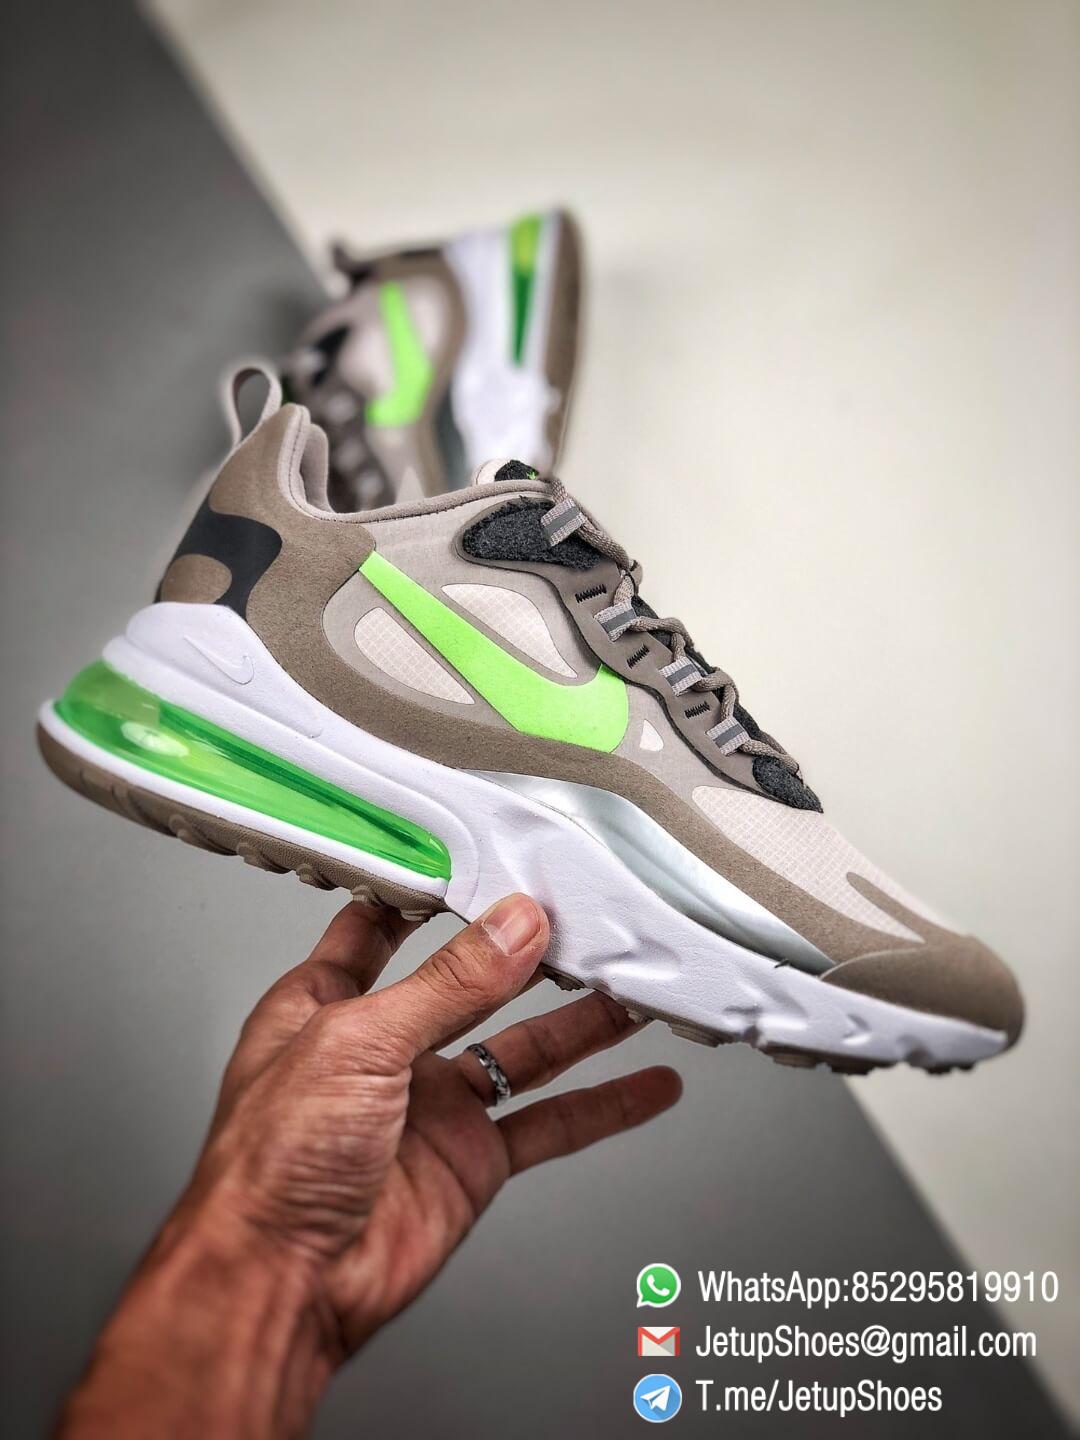 nike air max 270 react white and silver